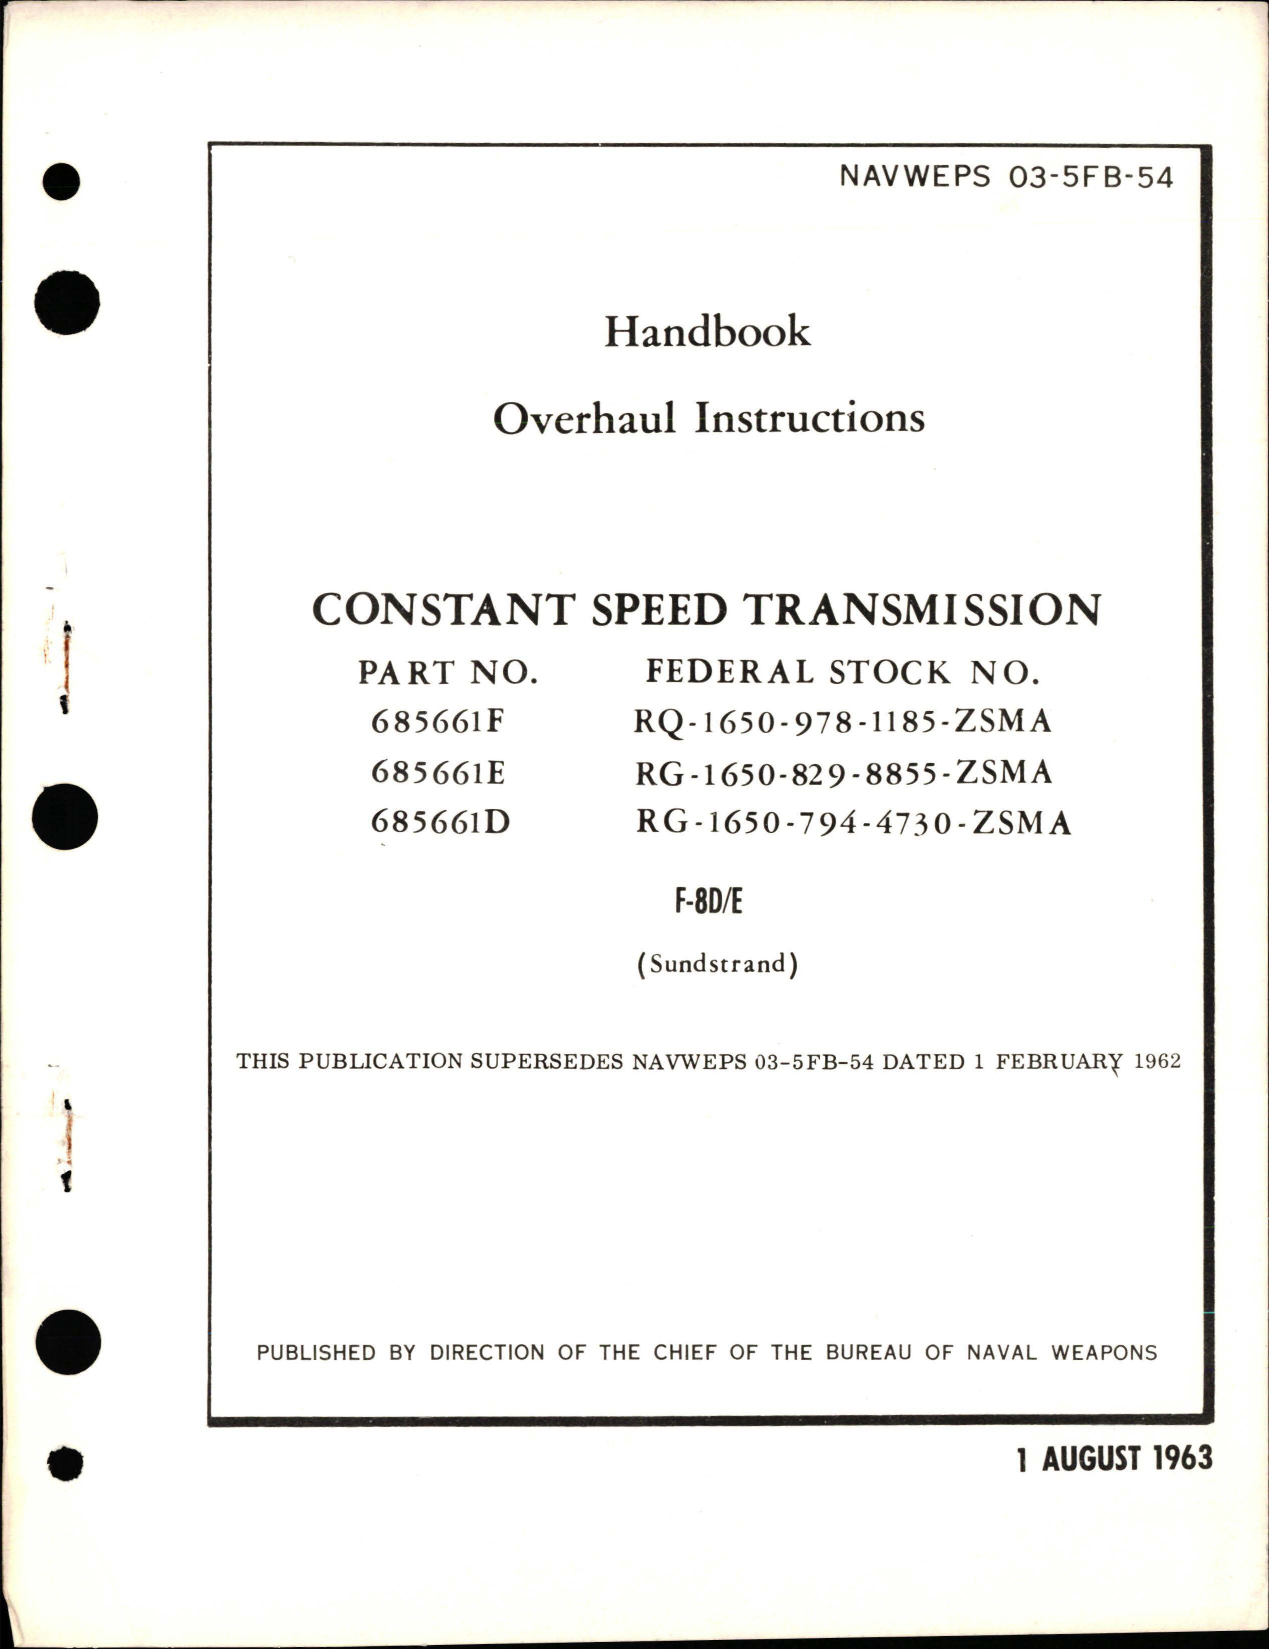 Sample page 1 from AirCorps Library document: Overhaul Instructions for Constant Speed Transmission - Parts 685661F, 685661E, 685661D